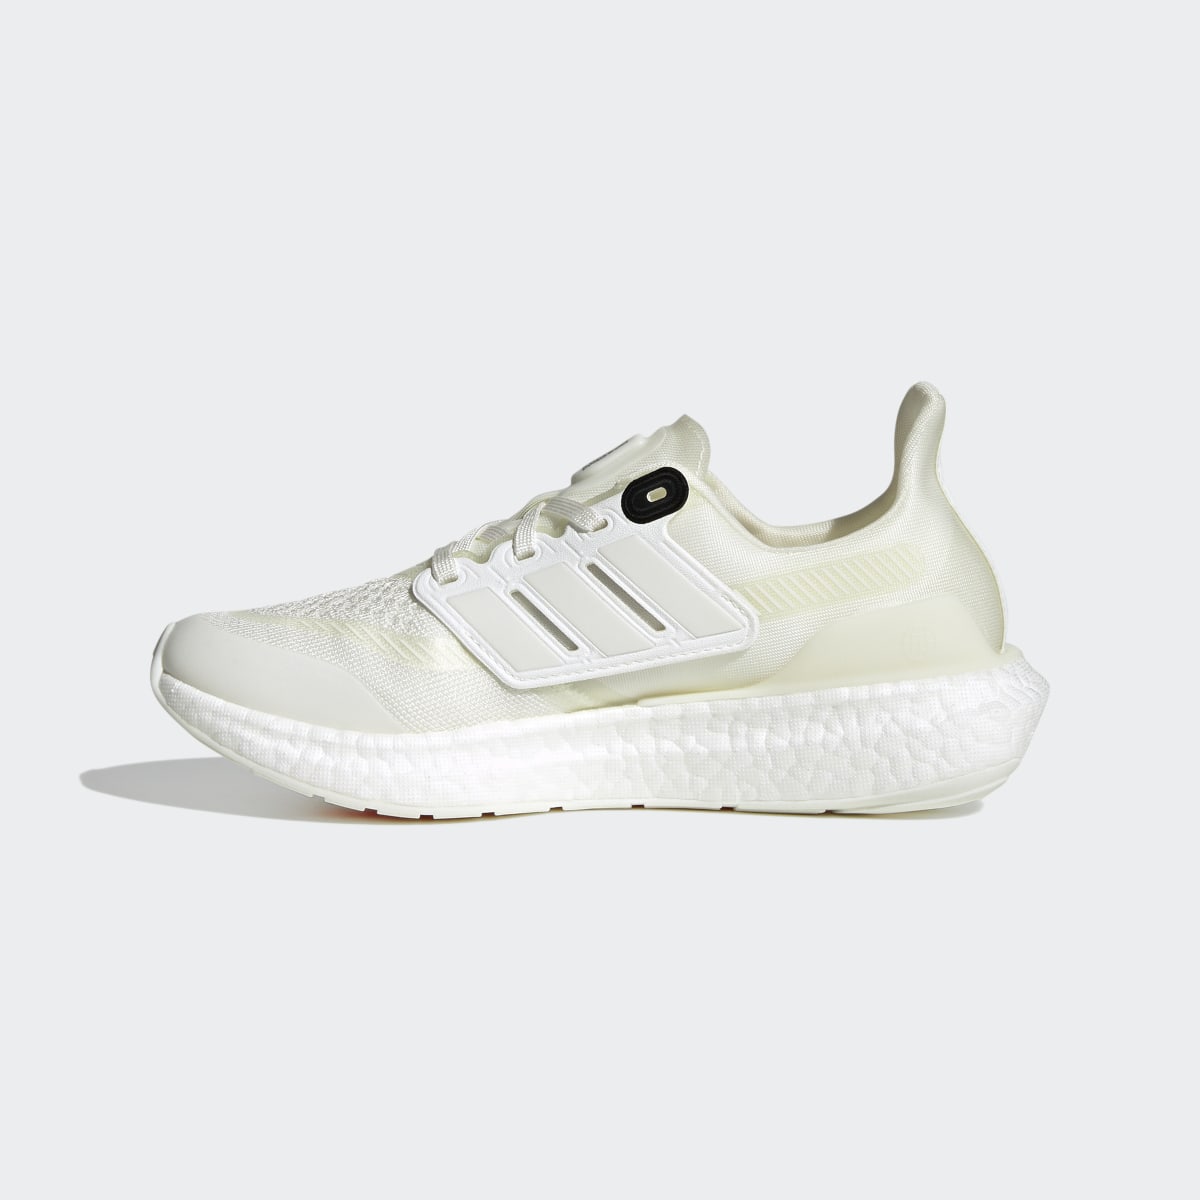 Adidas Scarpe Ultraboost Made To Be Remade 2.0. 10